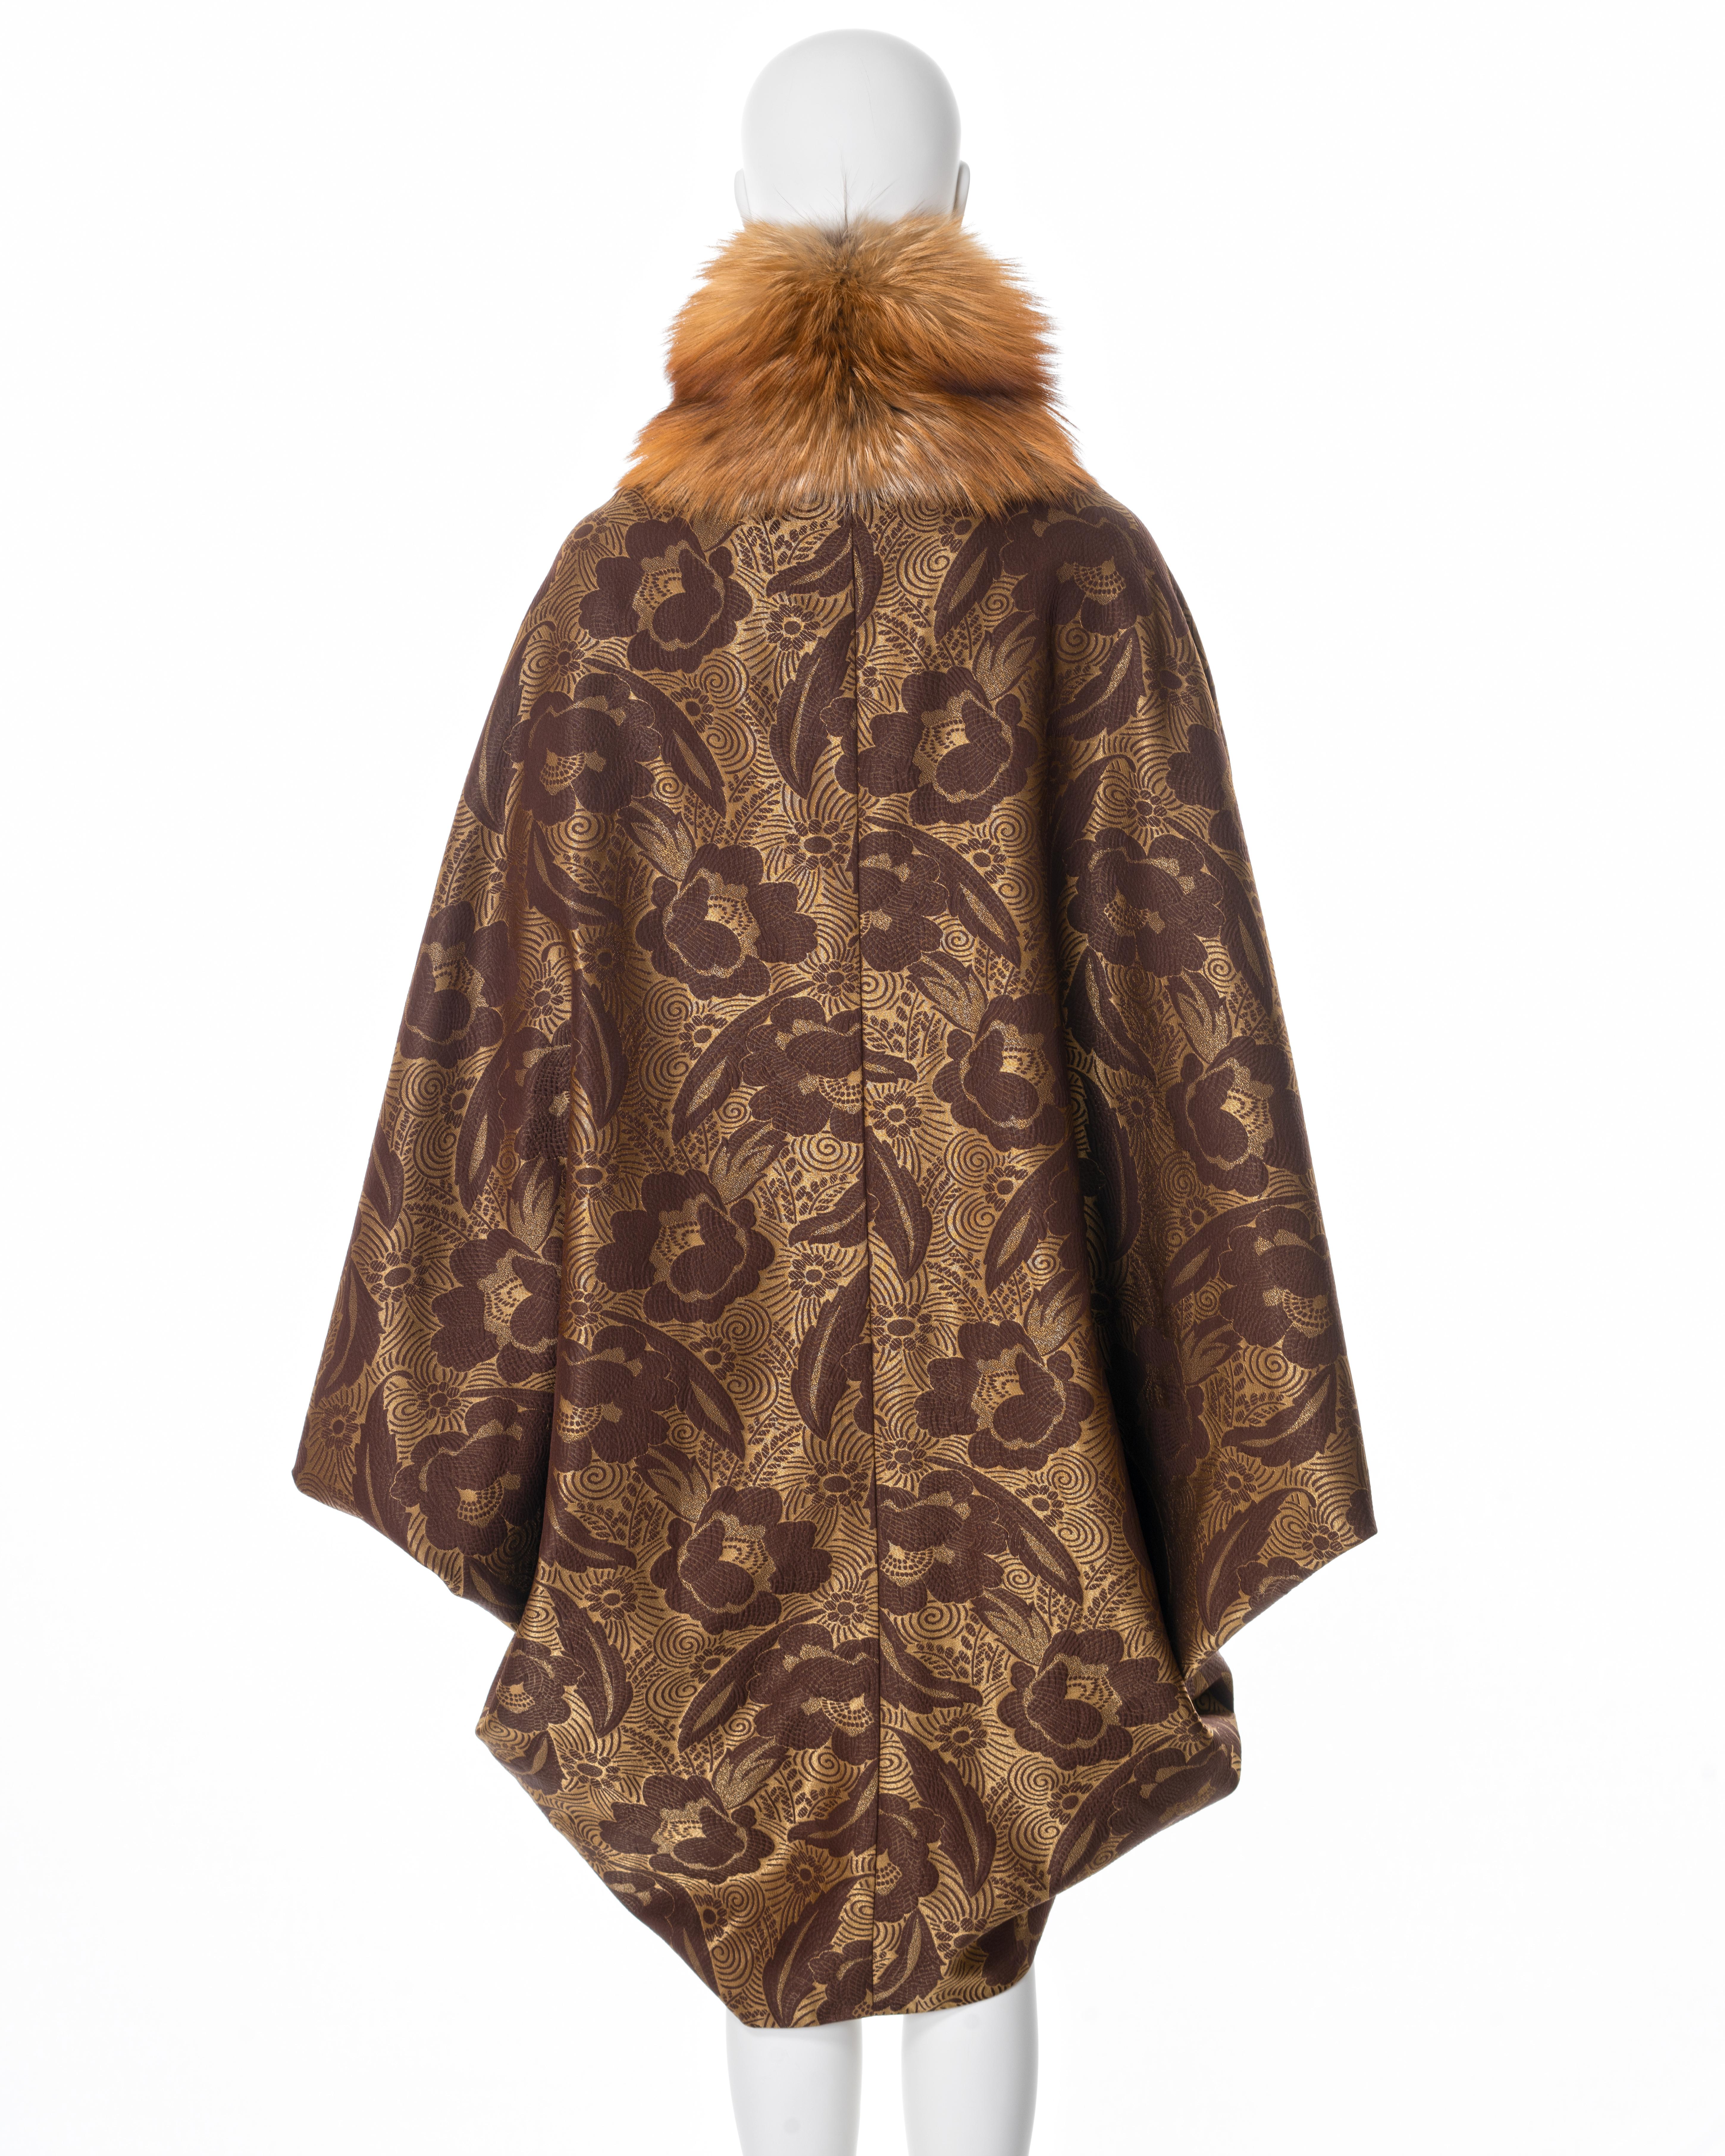 Christian Dior by John Galliano silk cocoon coat with fox fur collar, ss 2008 For Sale 4